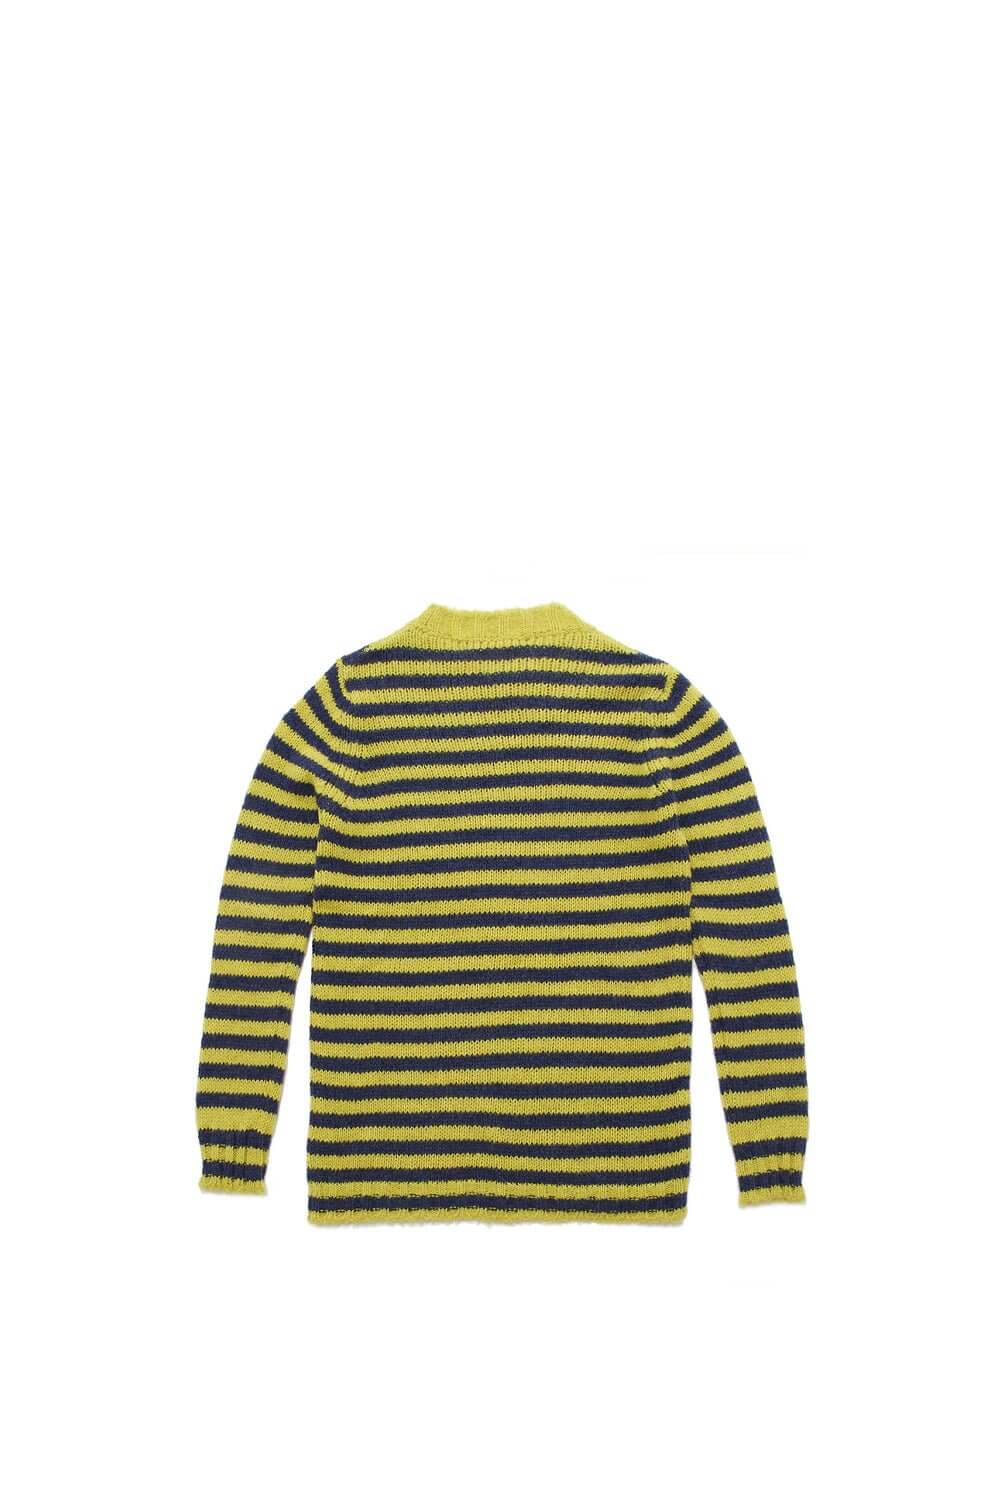 LIL LOGO OVER SWEATER Striped knit round neck sweater. 42% Acrylic 30% Polyamide 14% Mohair 14% Wool HTC LOS ANGELES